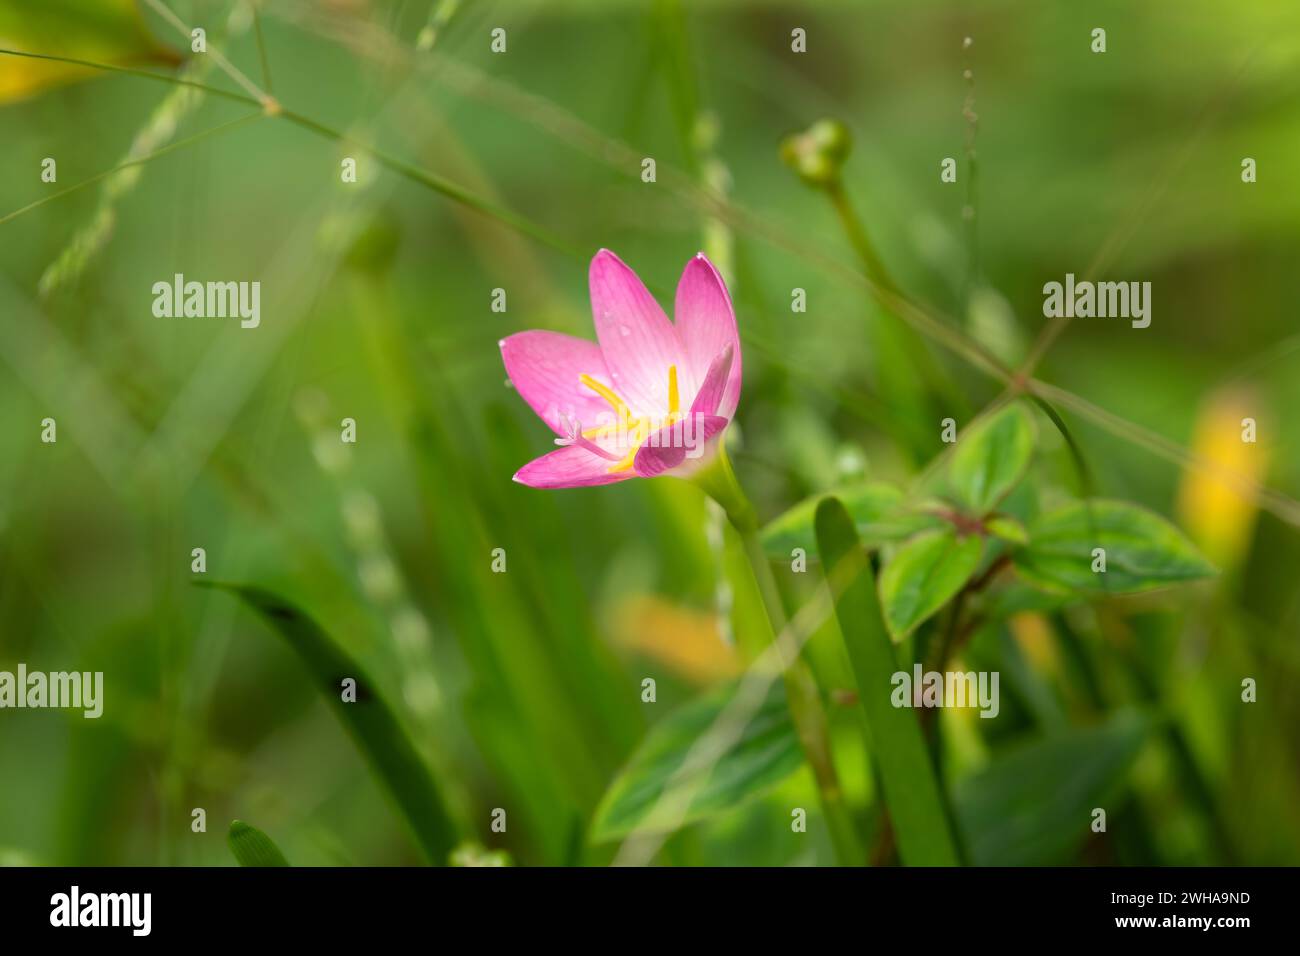 A beautiful lone rain lily flower in the garden. Also known as Zephyranthes grandiflora. Stock Photo